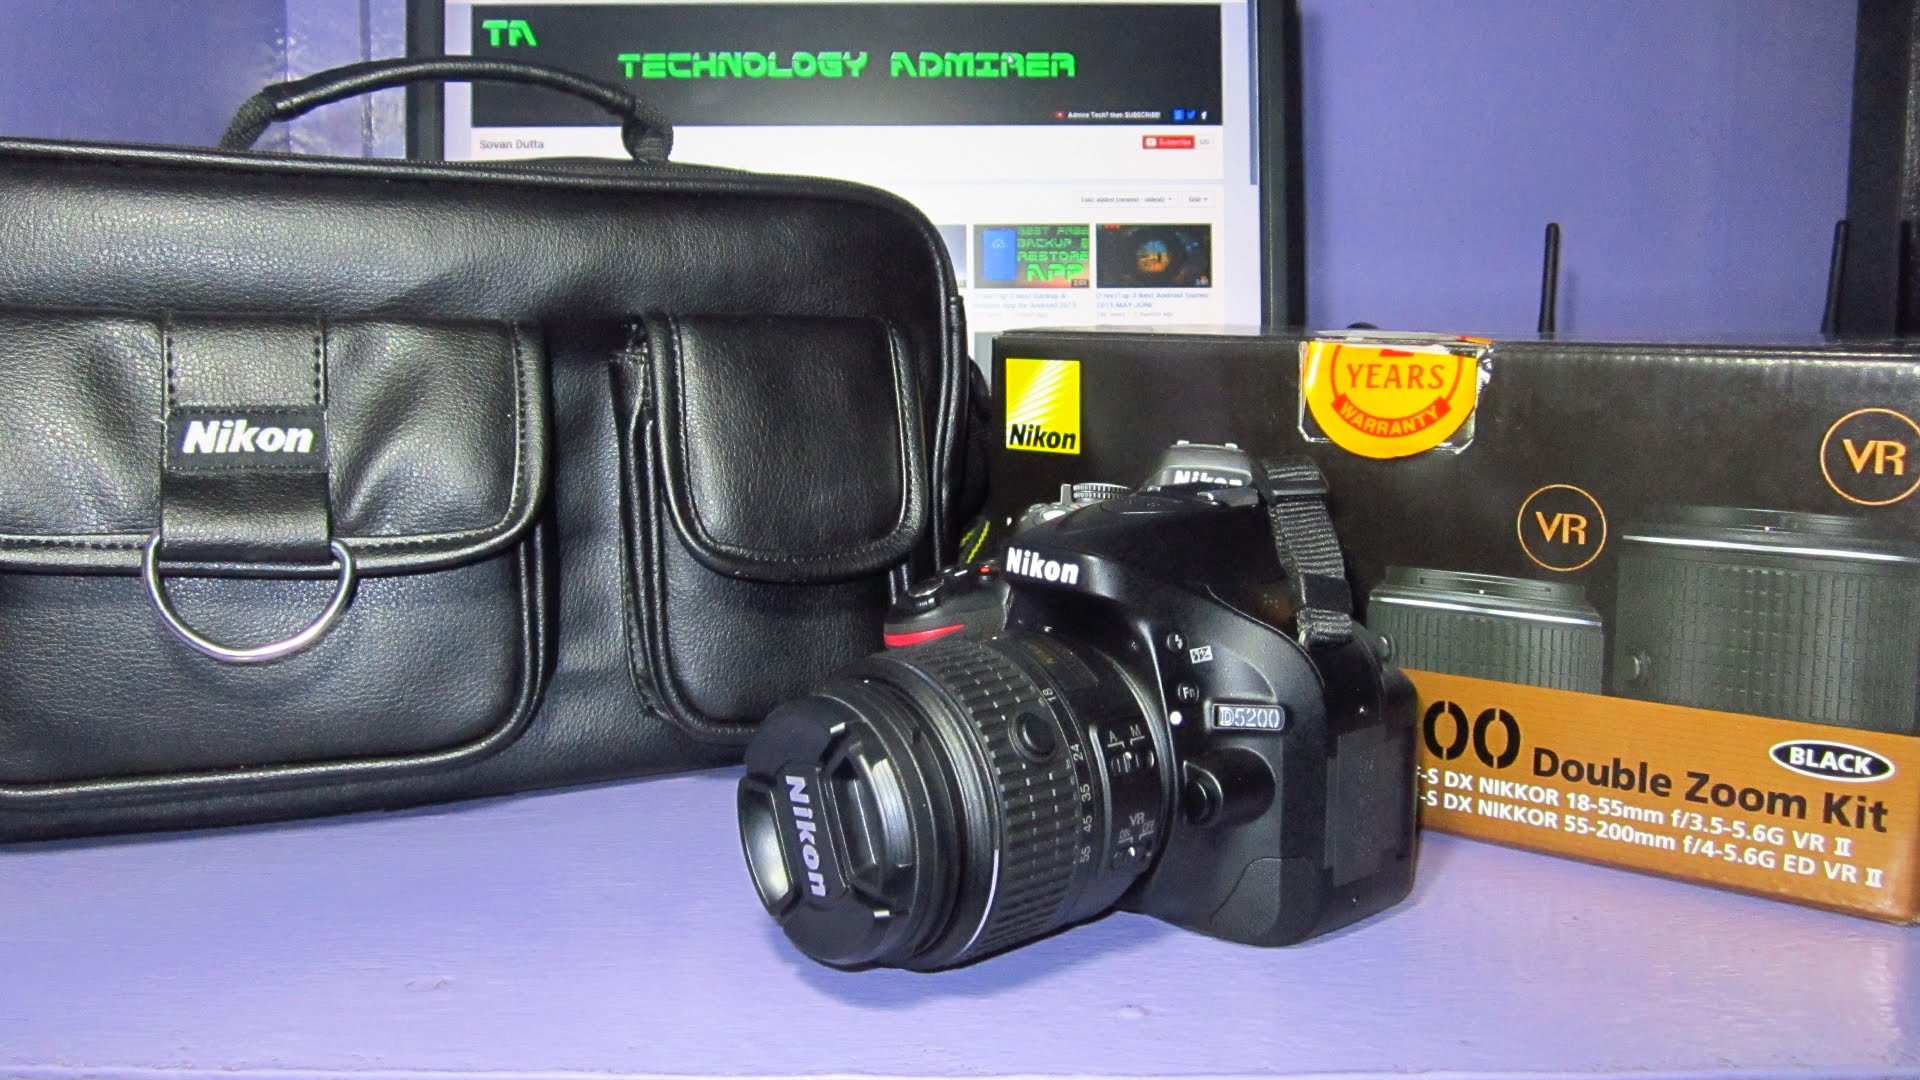 Nikon D5200 Unboxing India 2015-2016 with sample images/photos & sample slow motion video test